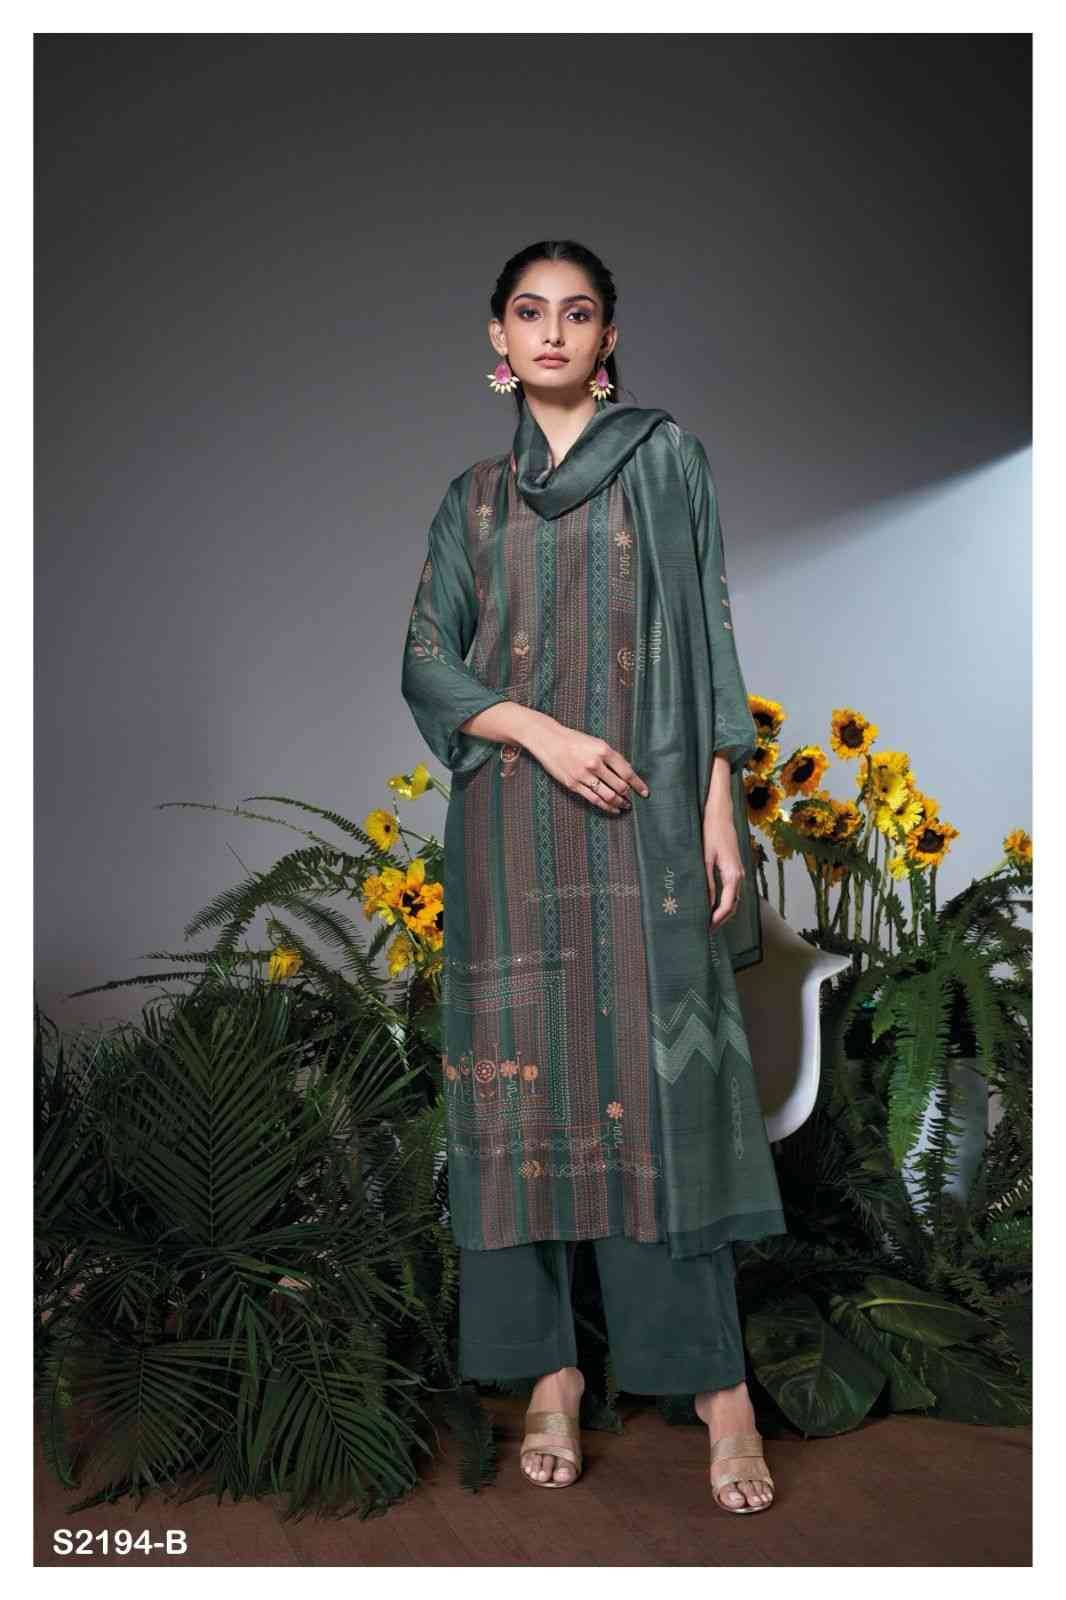 Agarsha-2194 By Ganga Fashion 2194-A To 2194-D Series Beautiful Festive Suits Colorful Stylish Fancy Casual Wear & Ethnic Wear Bemberg Silk Dresses At Wholesale Price